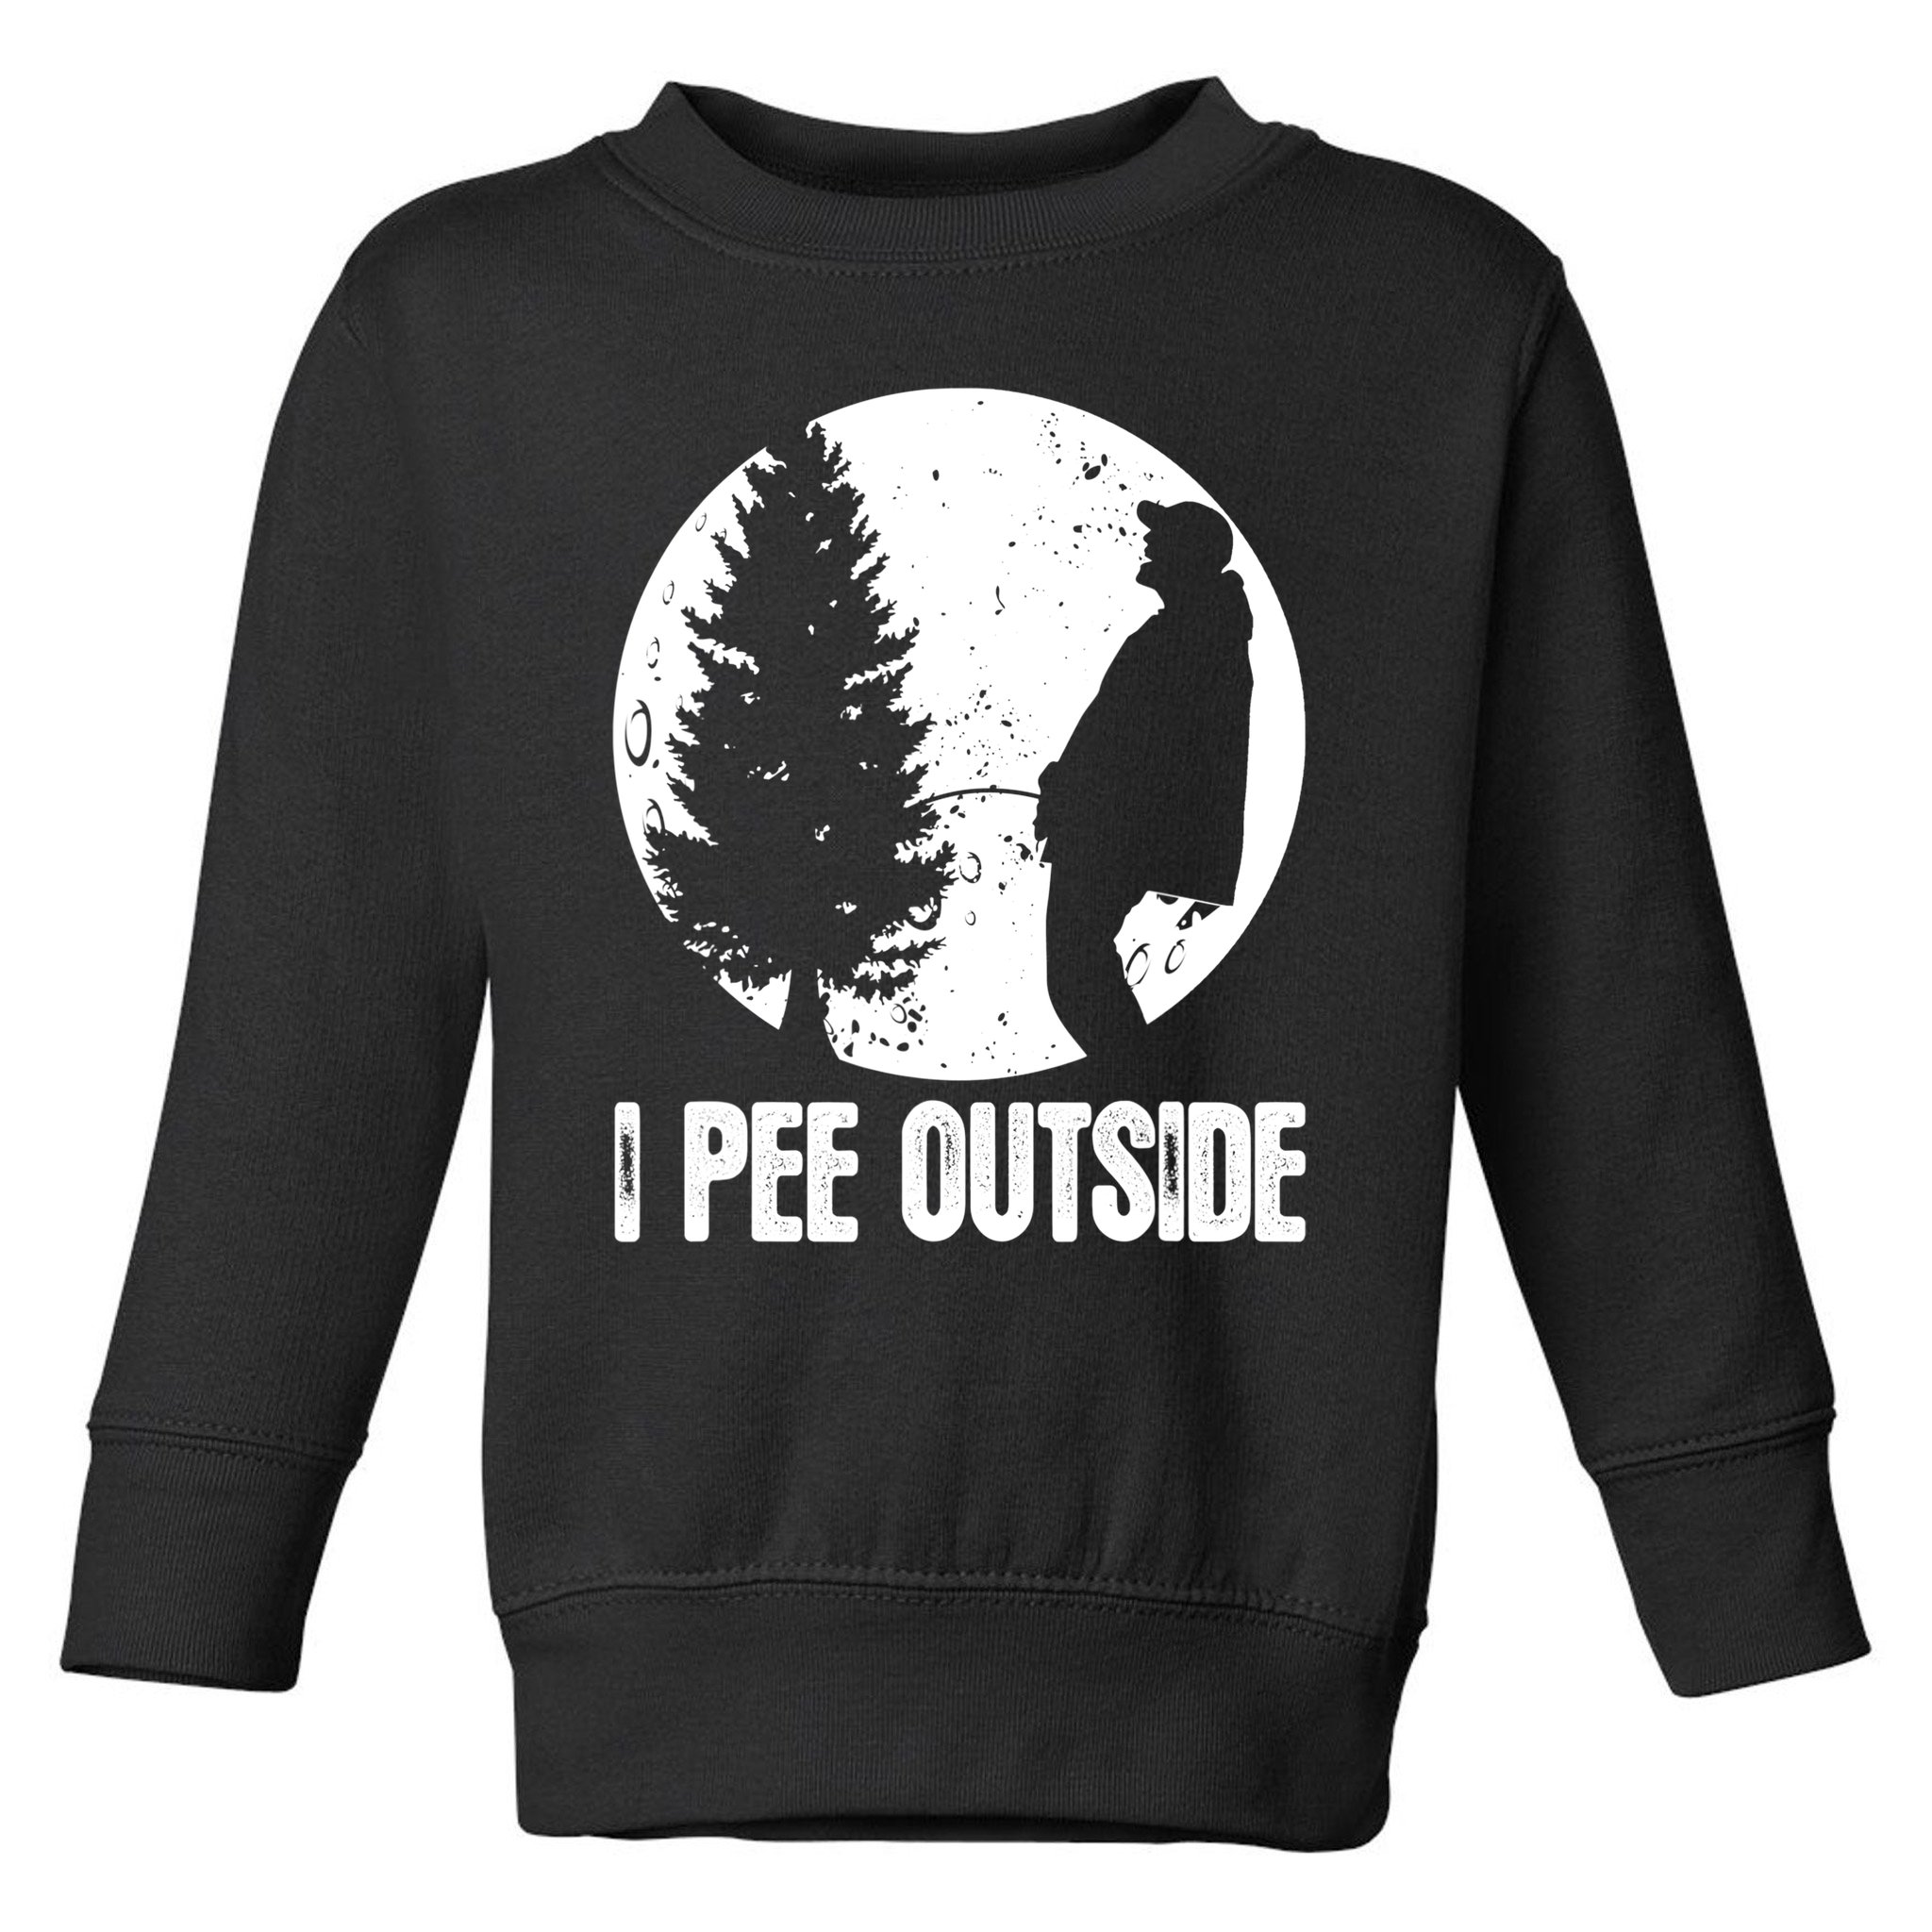 Mens Funny Camping Shirts For Men I Pee Outside Inappropriate